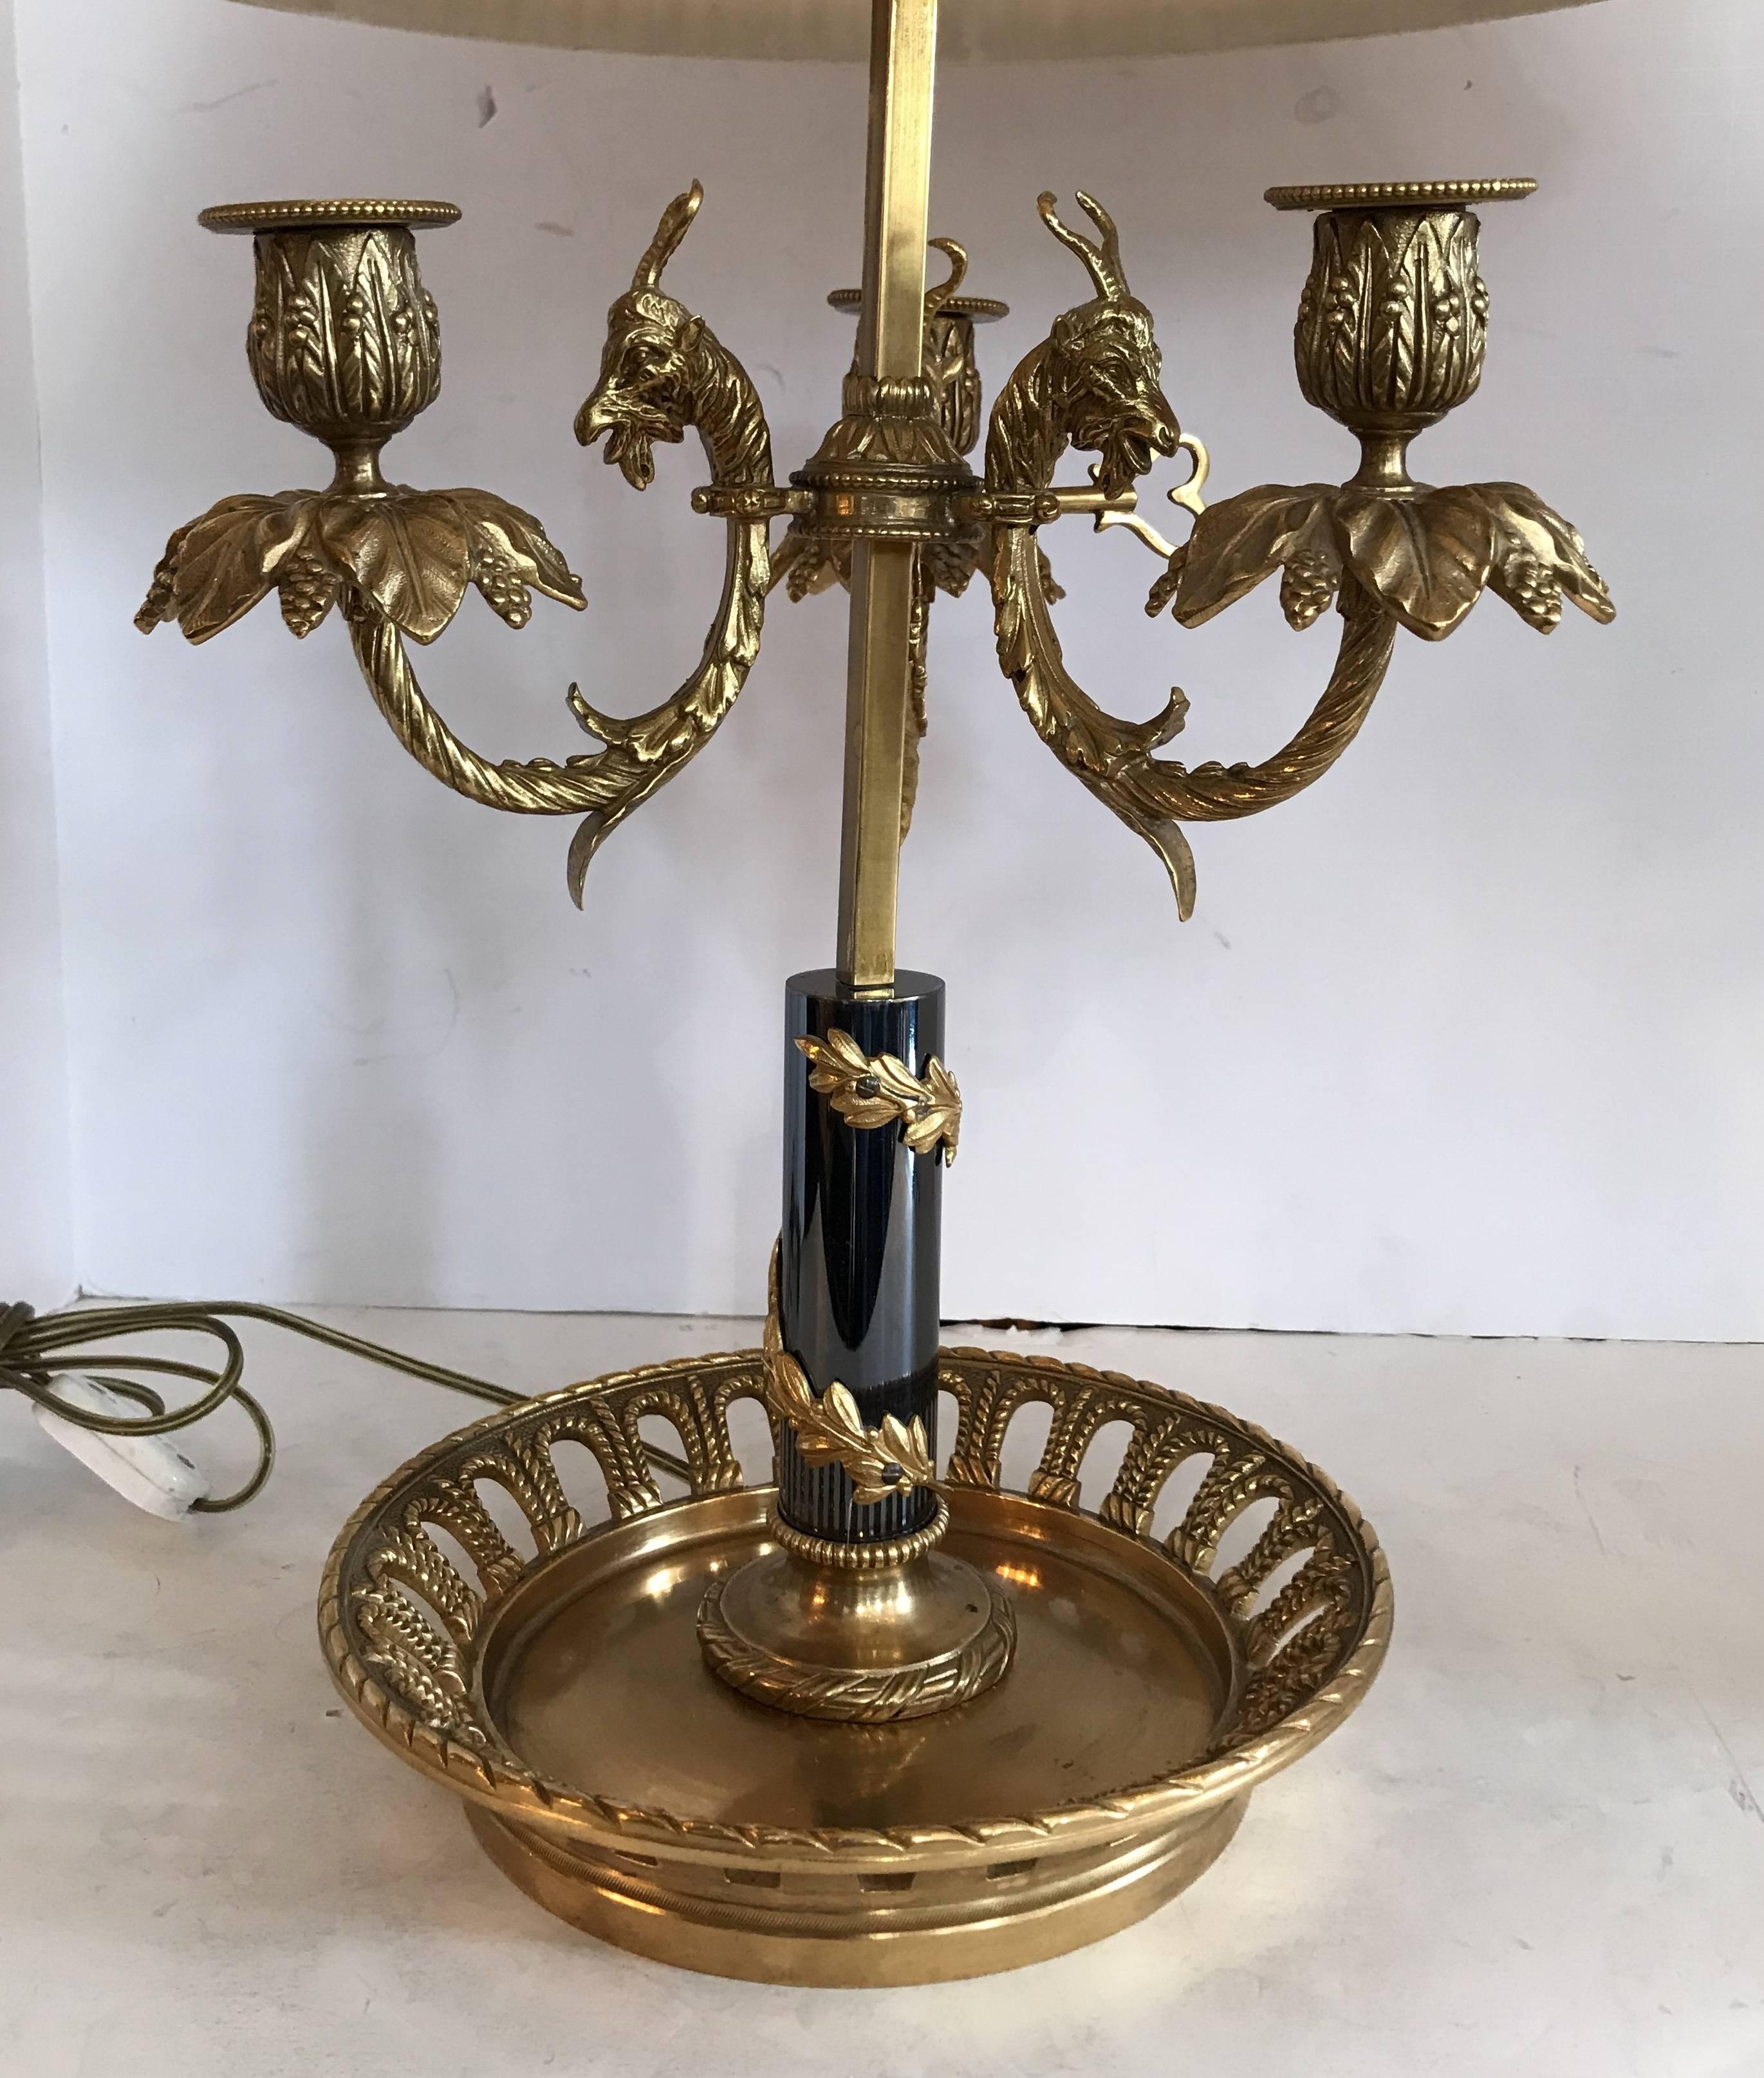 A wonderful large and rare French empire bronze Bouillet table lamp with goat heads in the manner of Pierre Gouthiere with basket form base and silk shade. Rewired with three candelabra sockets, shade does have minor indentations in the silk from